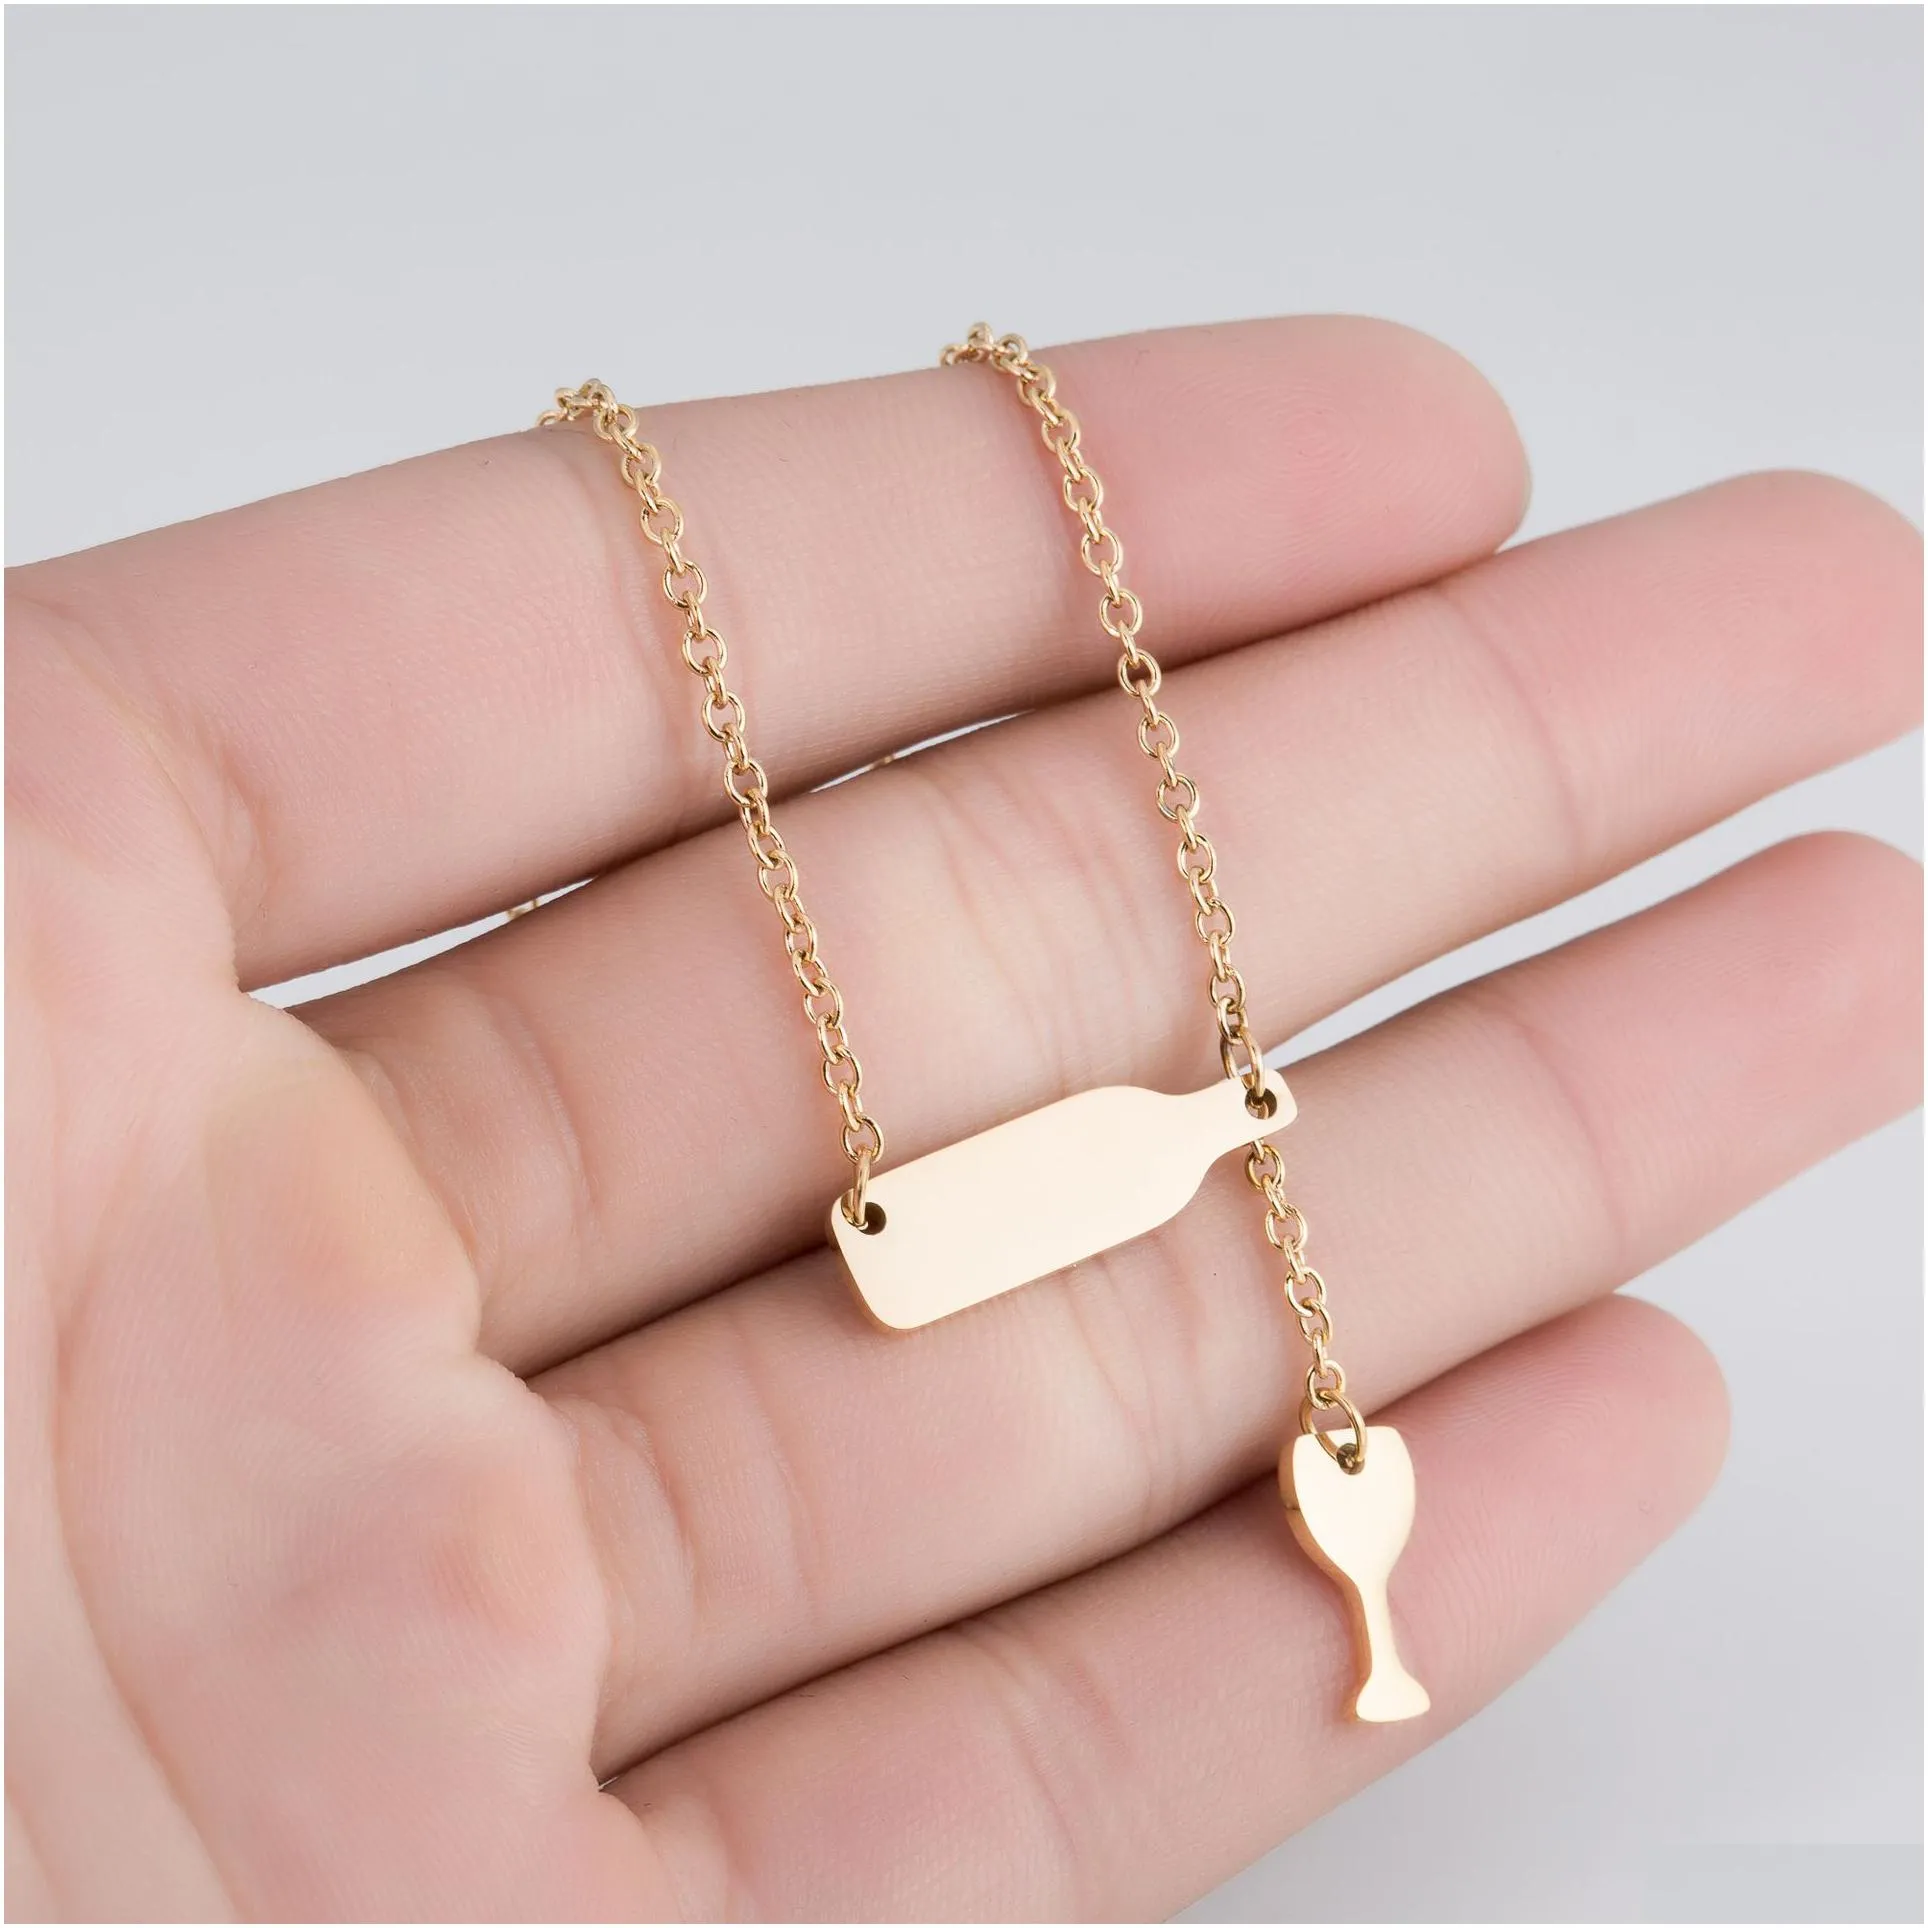 new arrival stainless steel beer cup bottle wine glass pendant necklace choker chain women fashion jewelry gift